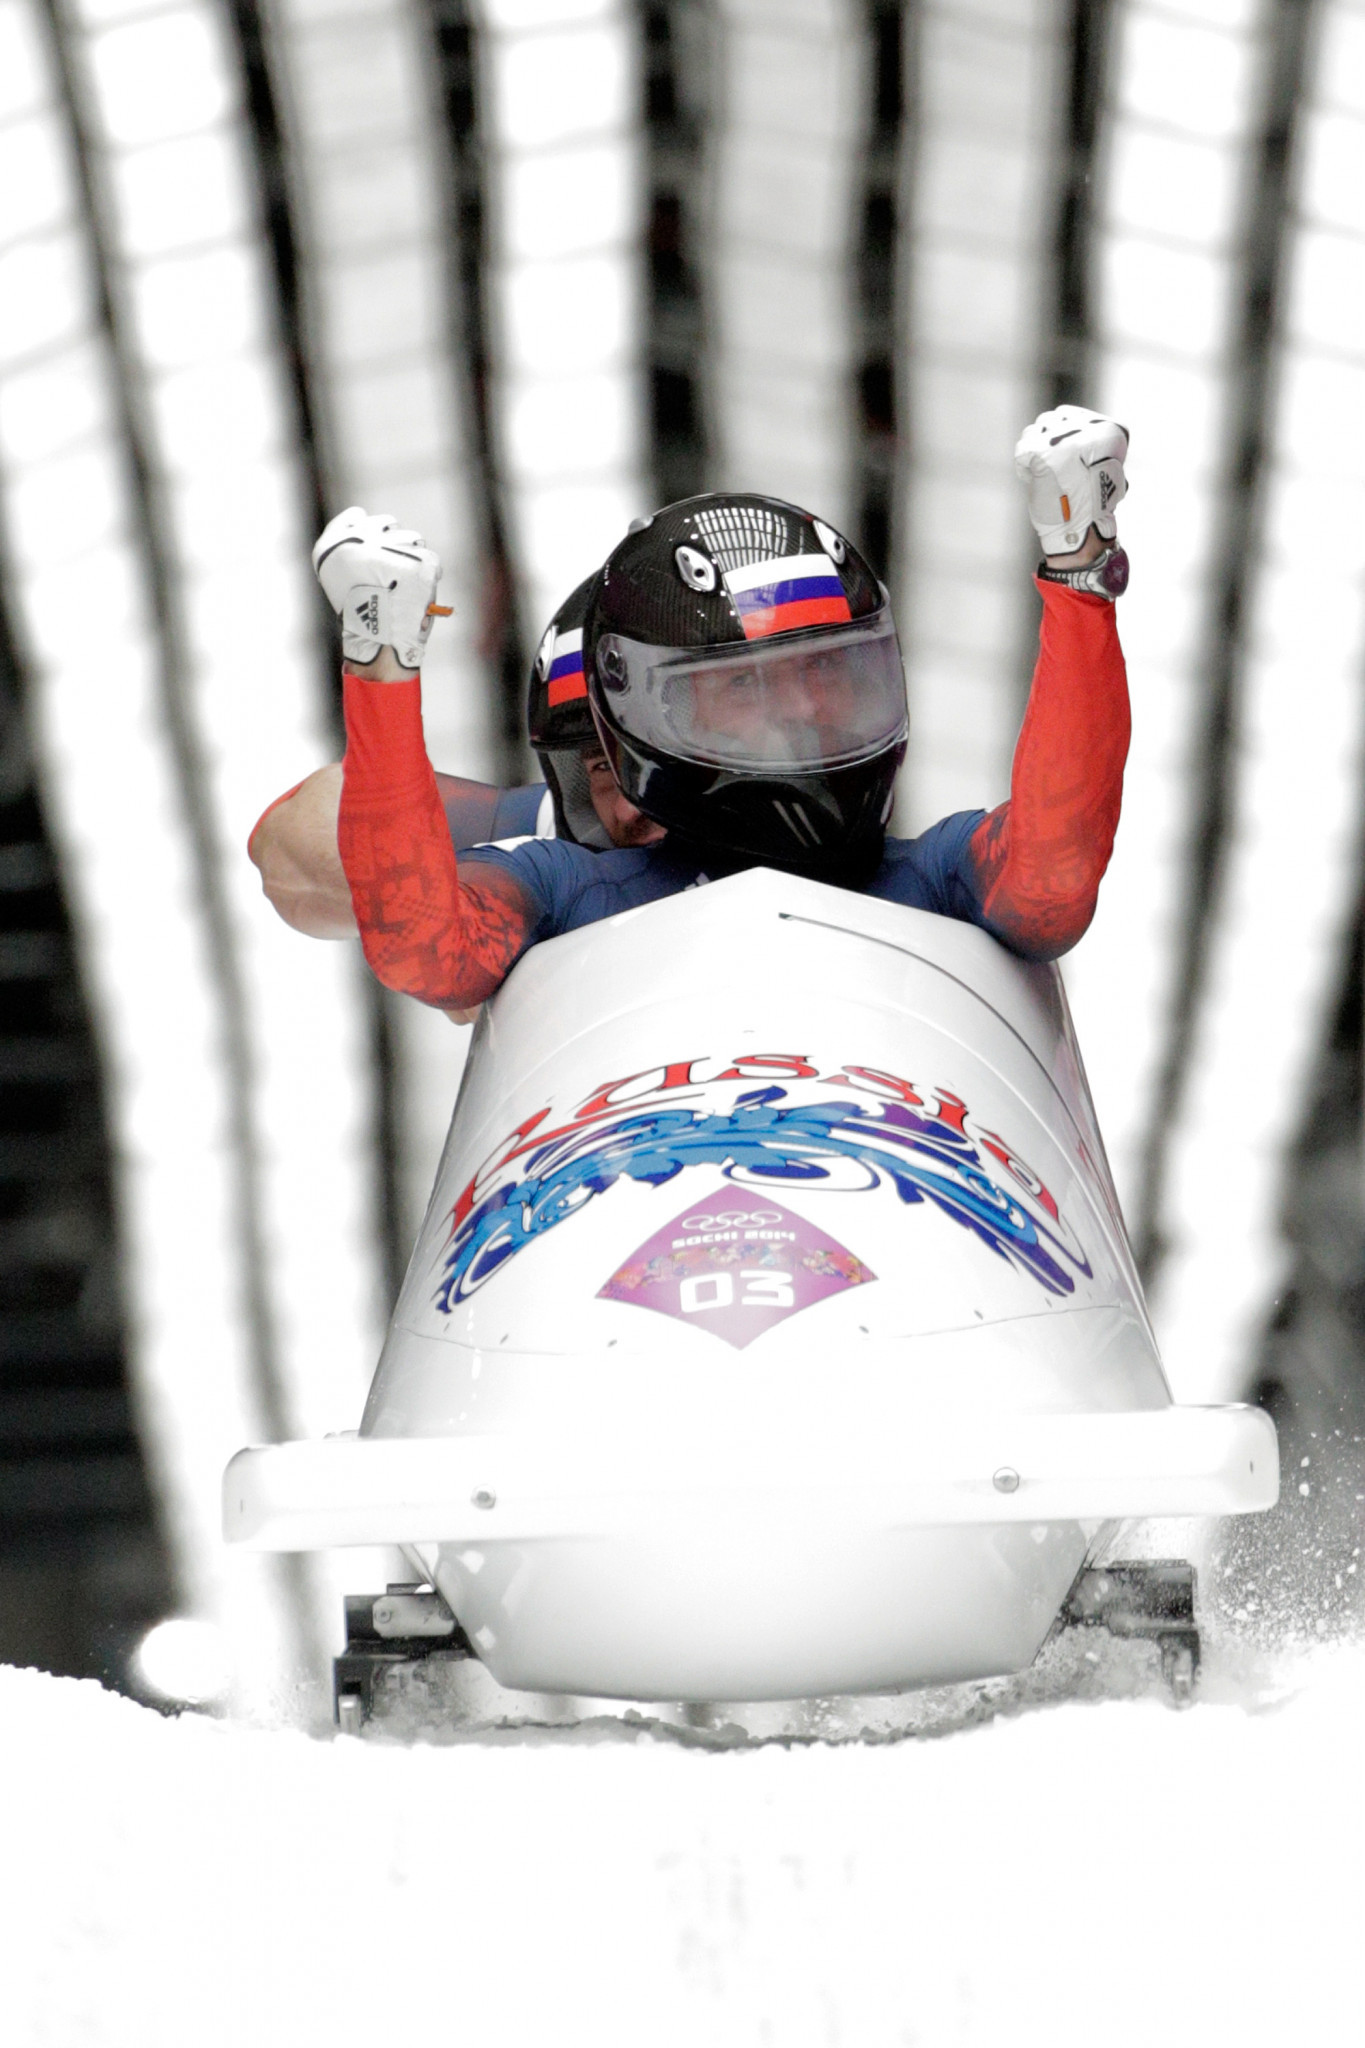 Alexander Zubkov and Alexey Voevoda won the Olympic gold medals in the two-man bobsleigh at Sochi 2014 but were subsequently stripped of the title for doping and are now banned  ©Getty Images